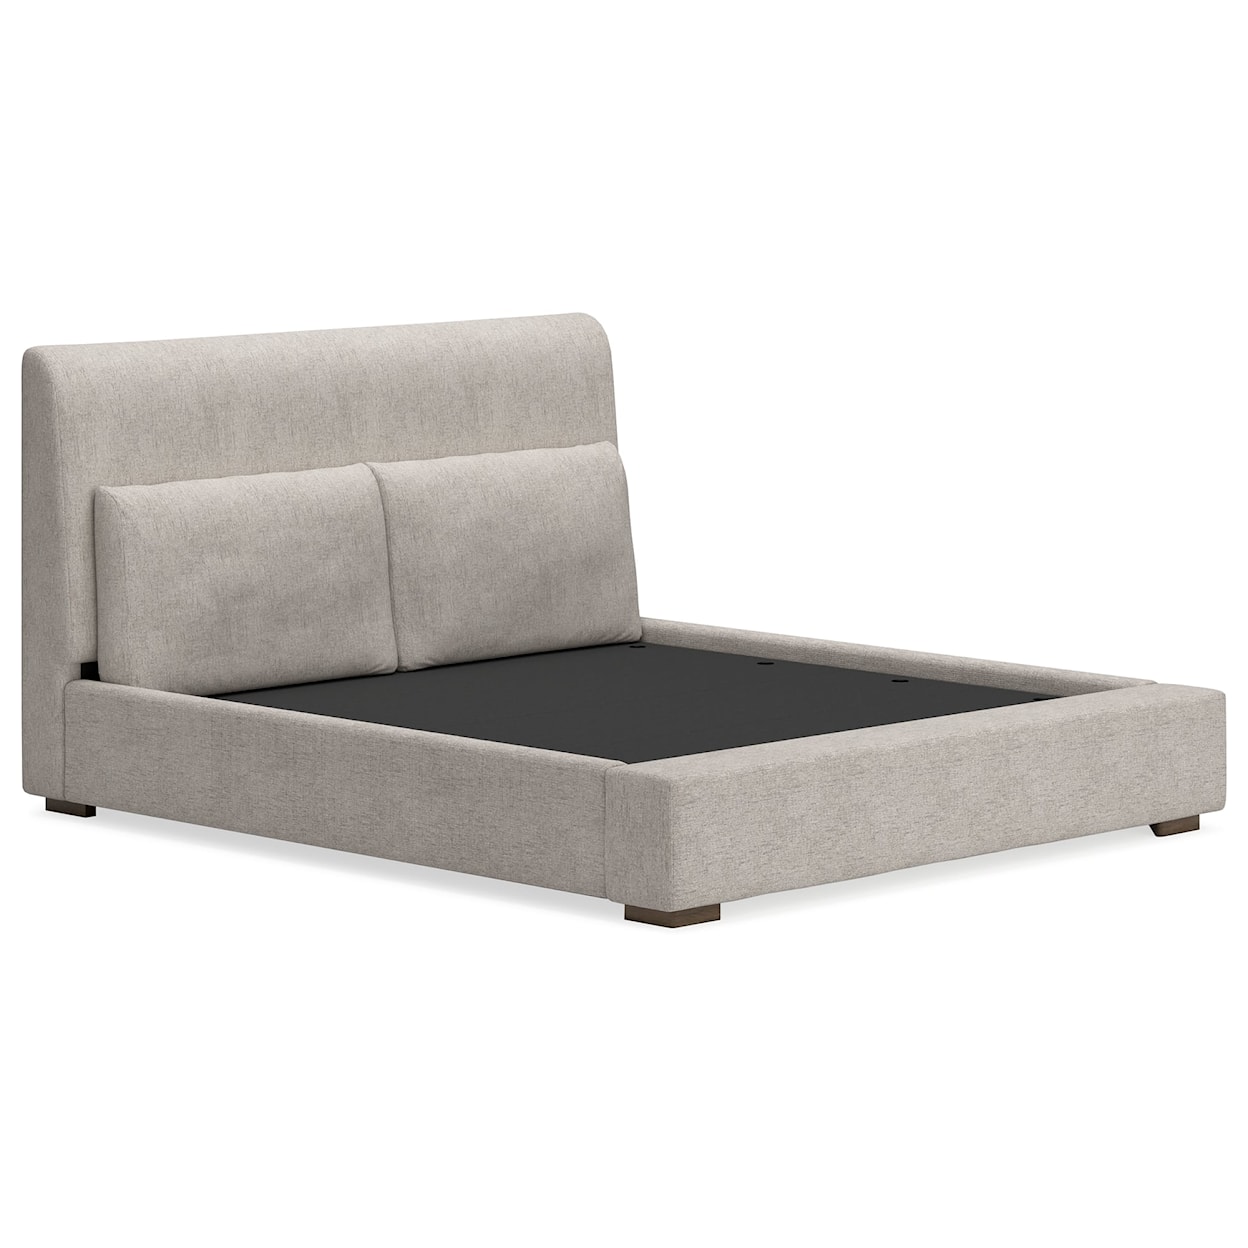 Benchcraft Cabalynn Queen Upholstered Bed